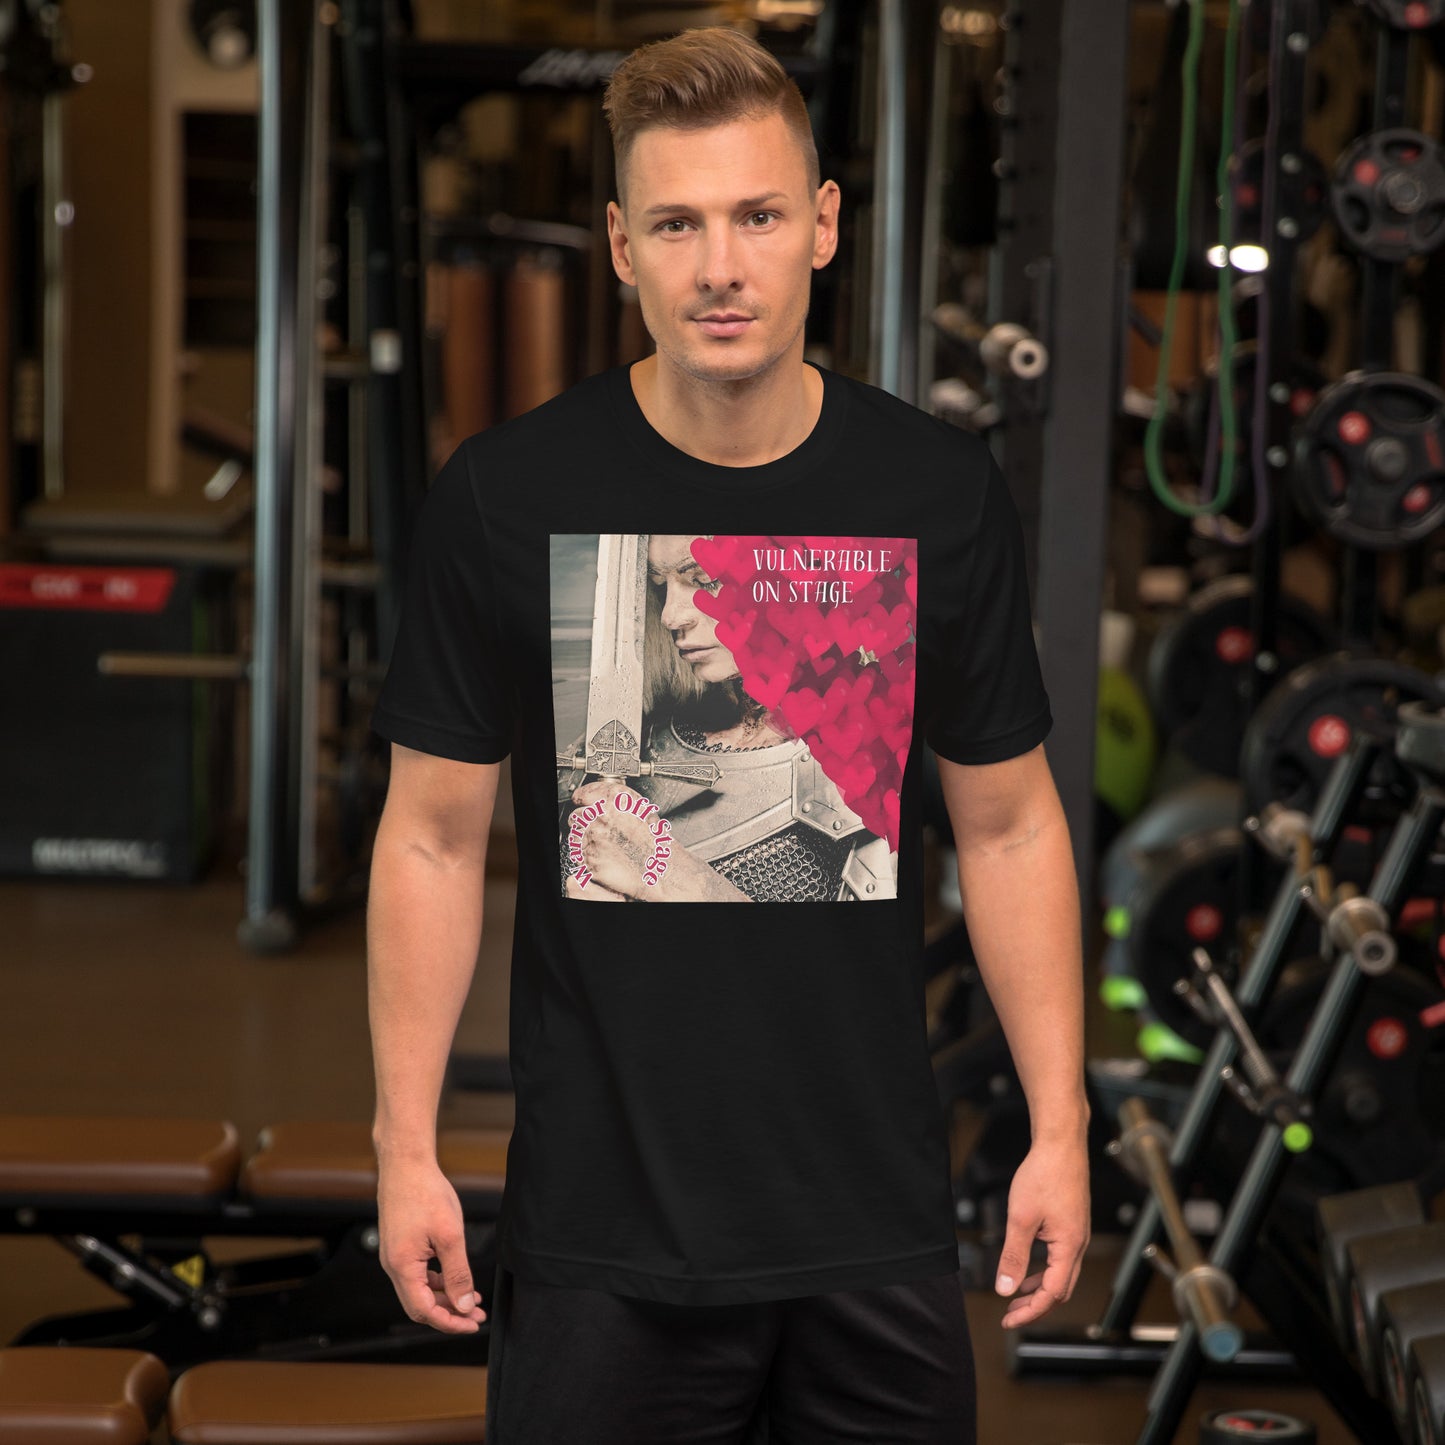 A bold and stylish Unisex Artist Vulnerable Warrior T-Shirt in Classic design, specifically crafted for Female Artists The shirt features empowering graphics, celebrating authenticity on stage and fierce warrior strength off stage. Perfect for making a statement in the world of art and beyond. Black Tee 